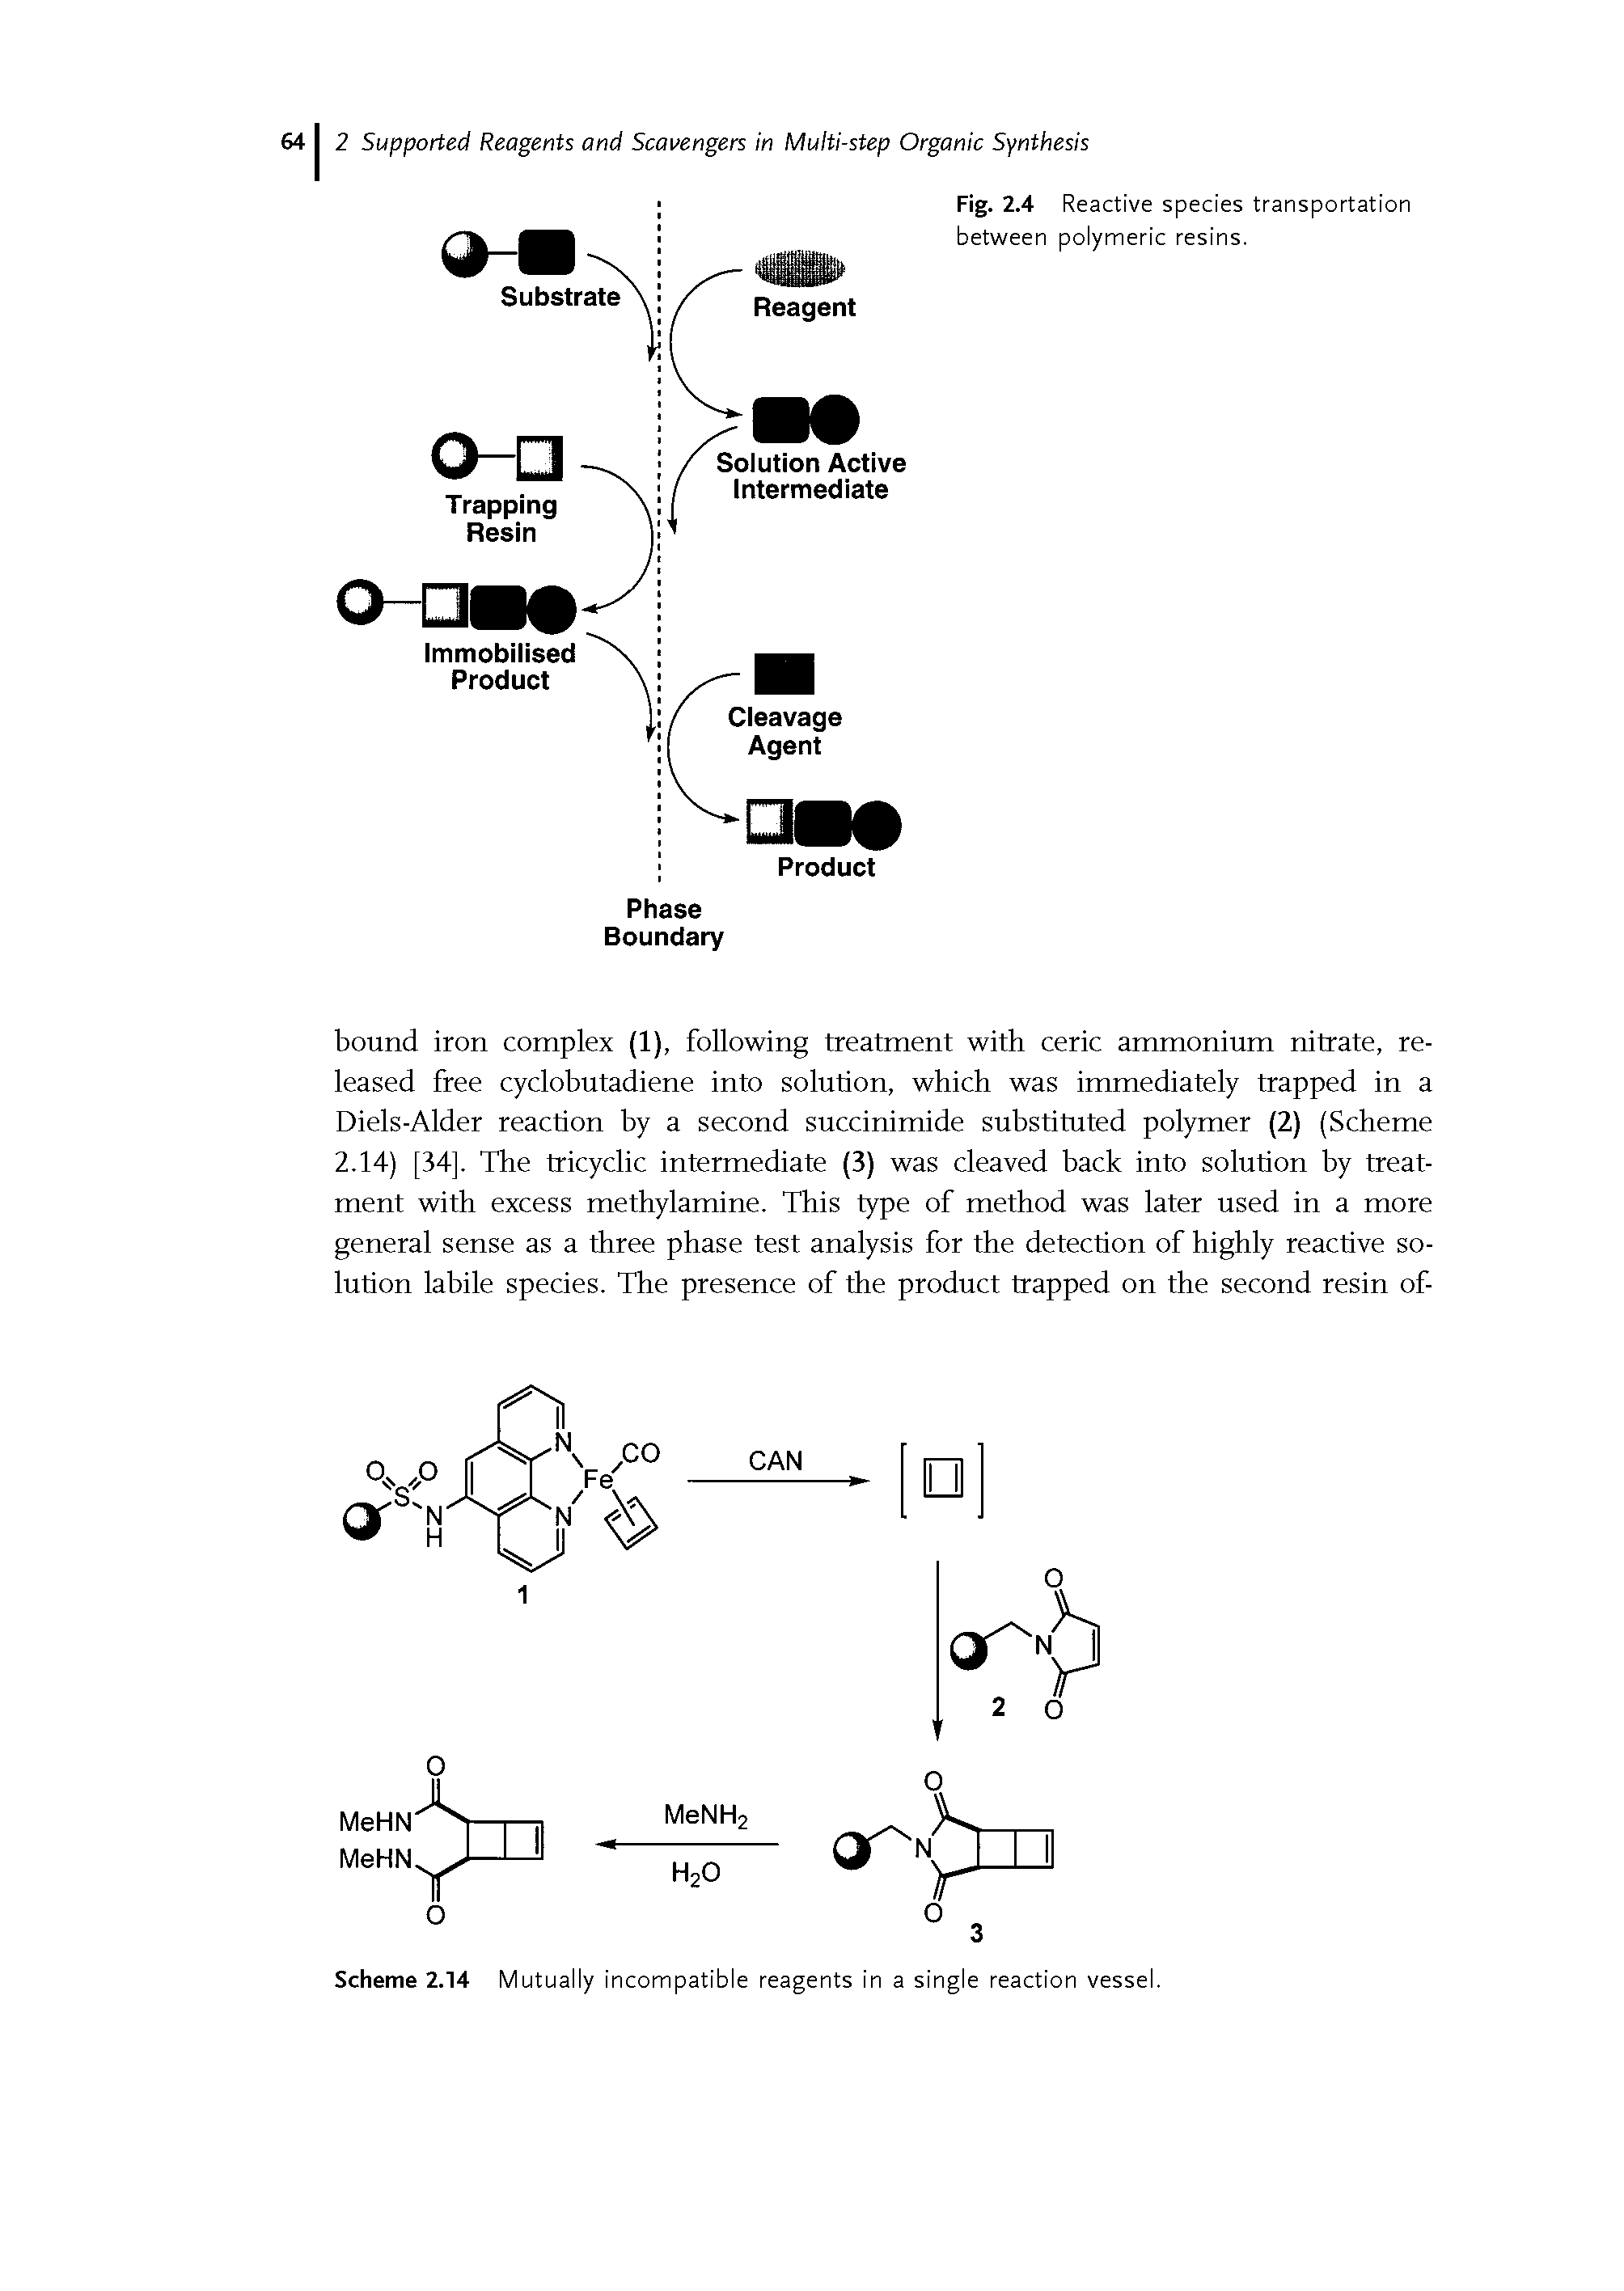 Scheme 2.14 Mutually incompatible reagents in a single reaction vessel.